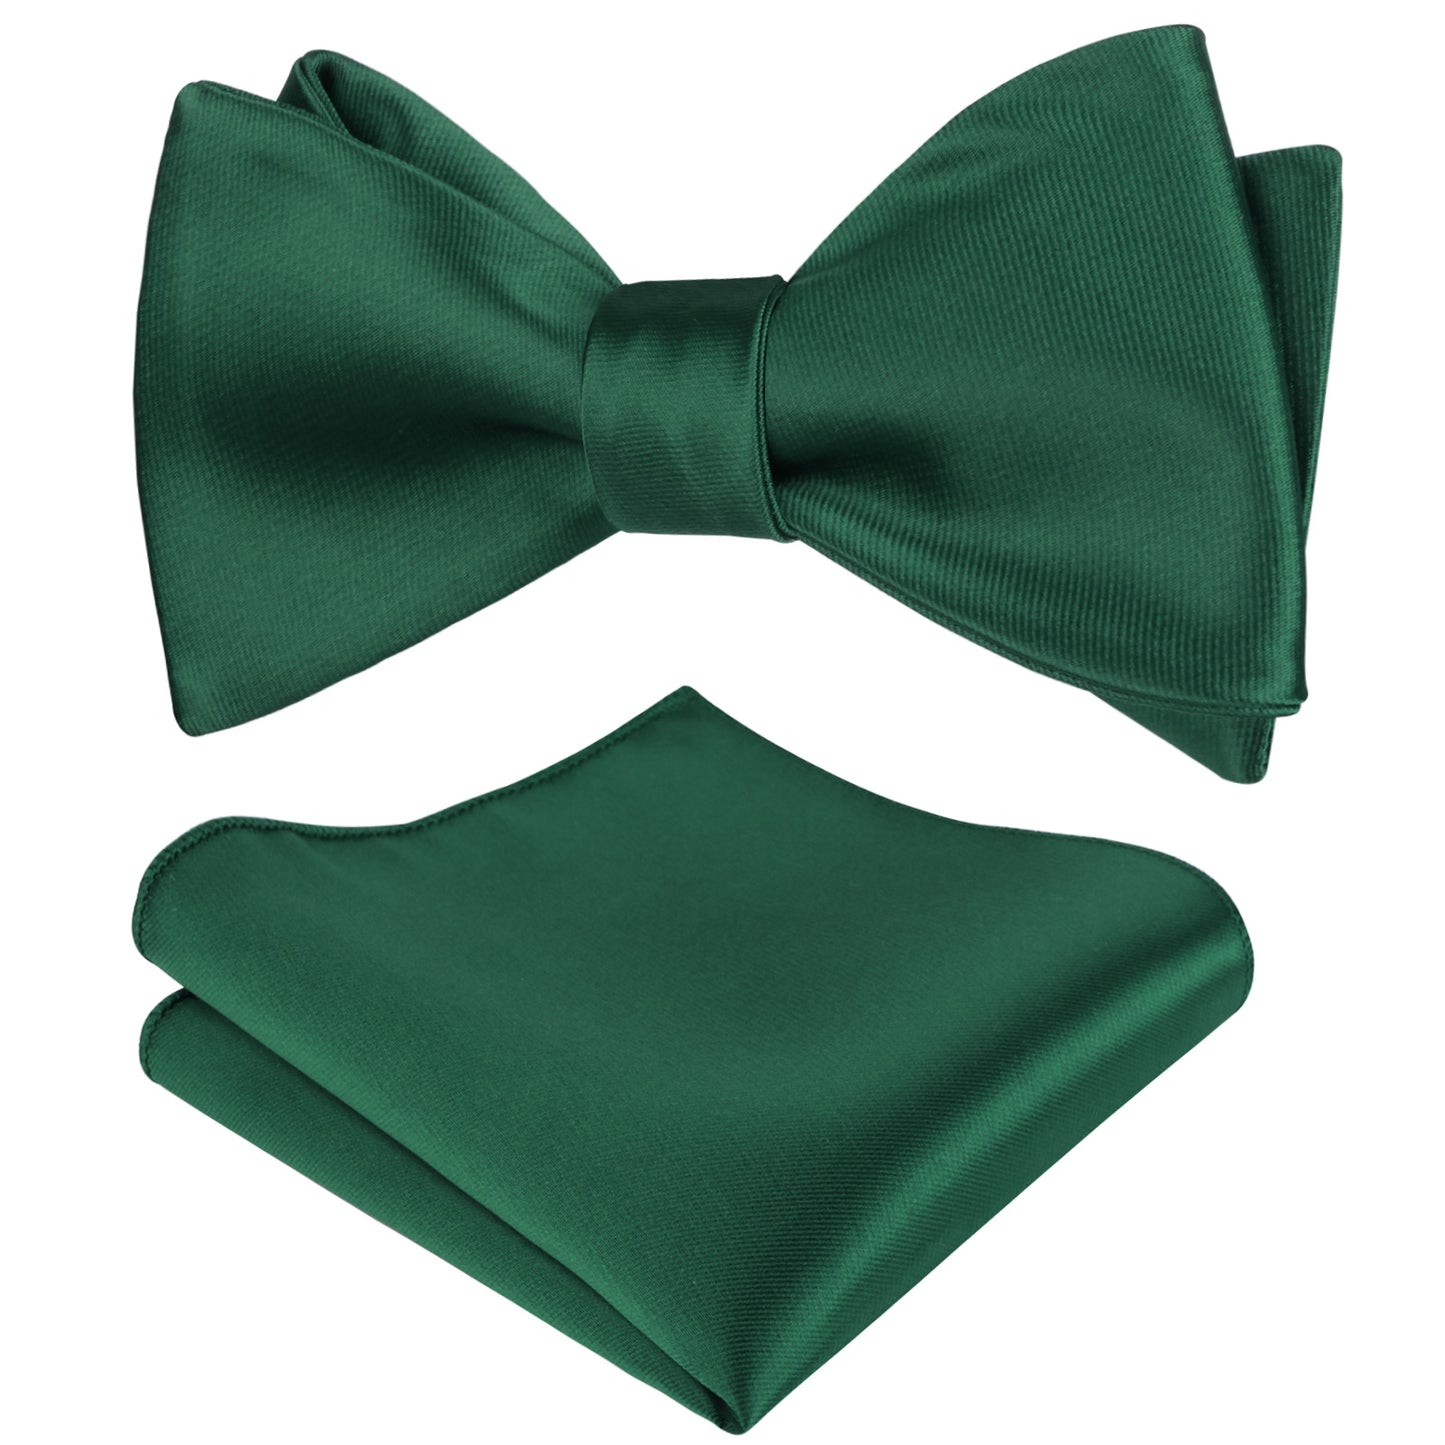 Alizeal Solid Color Self-tied Bow Tie and Hanky Set for Adults Dress Formal Wear, #036